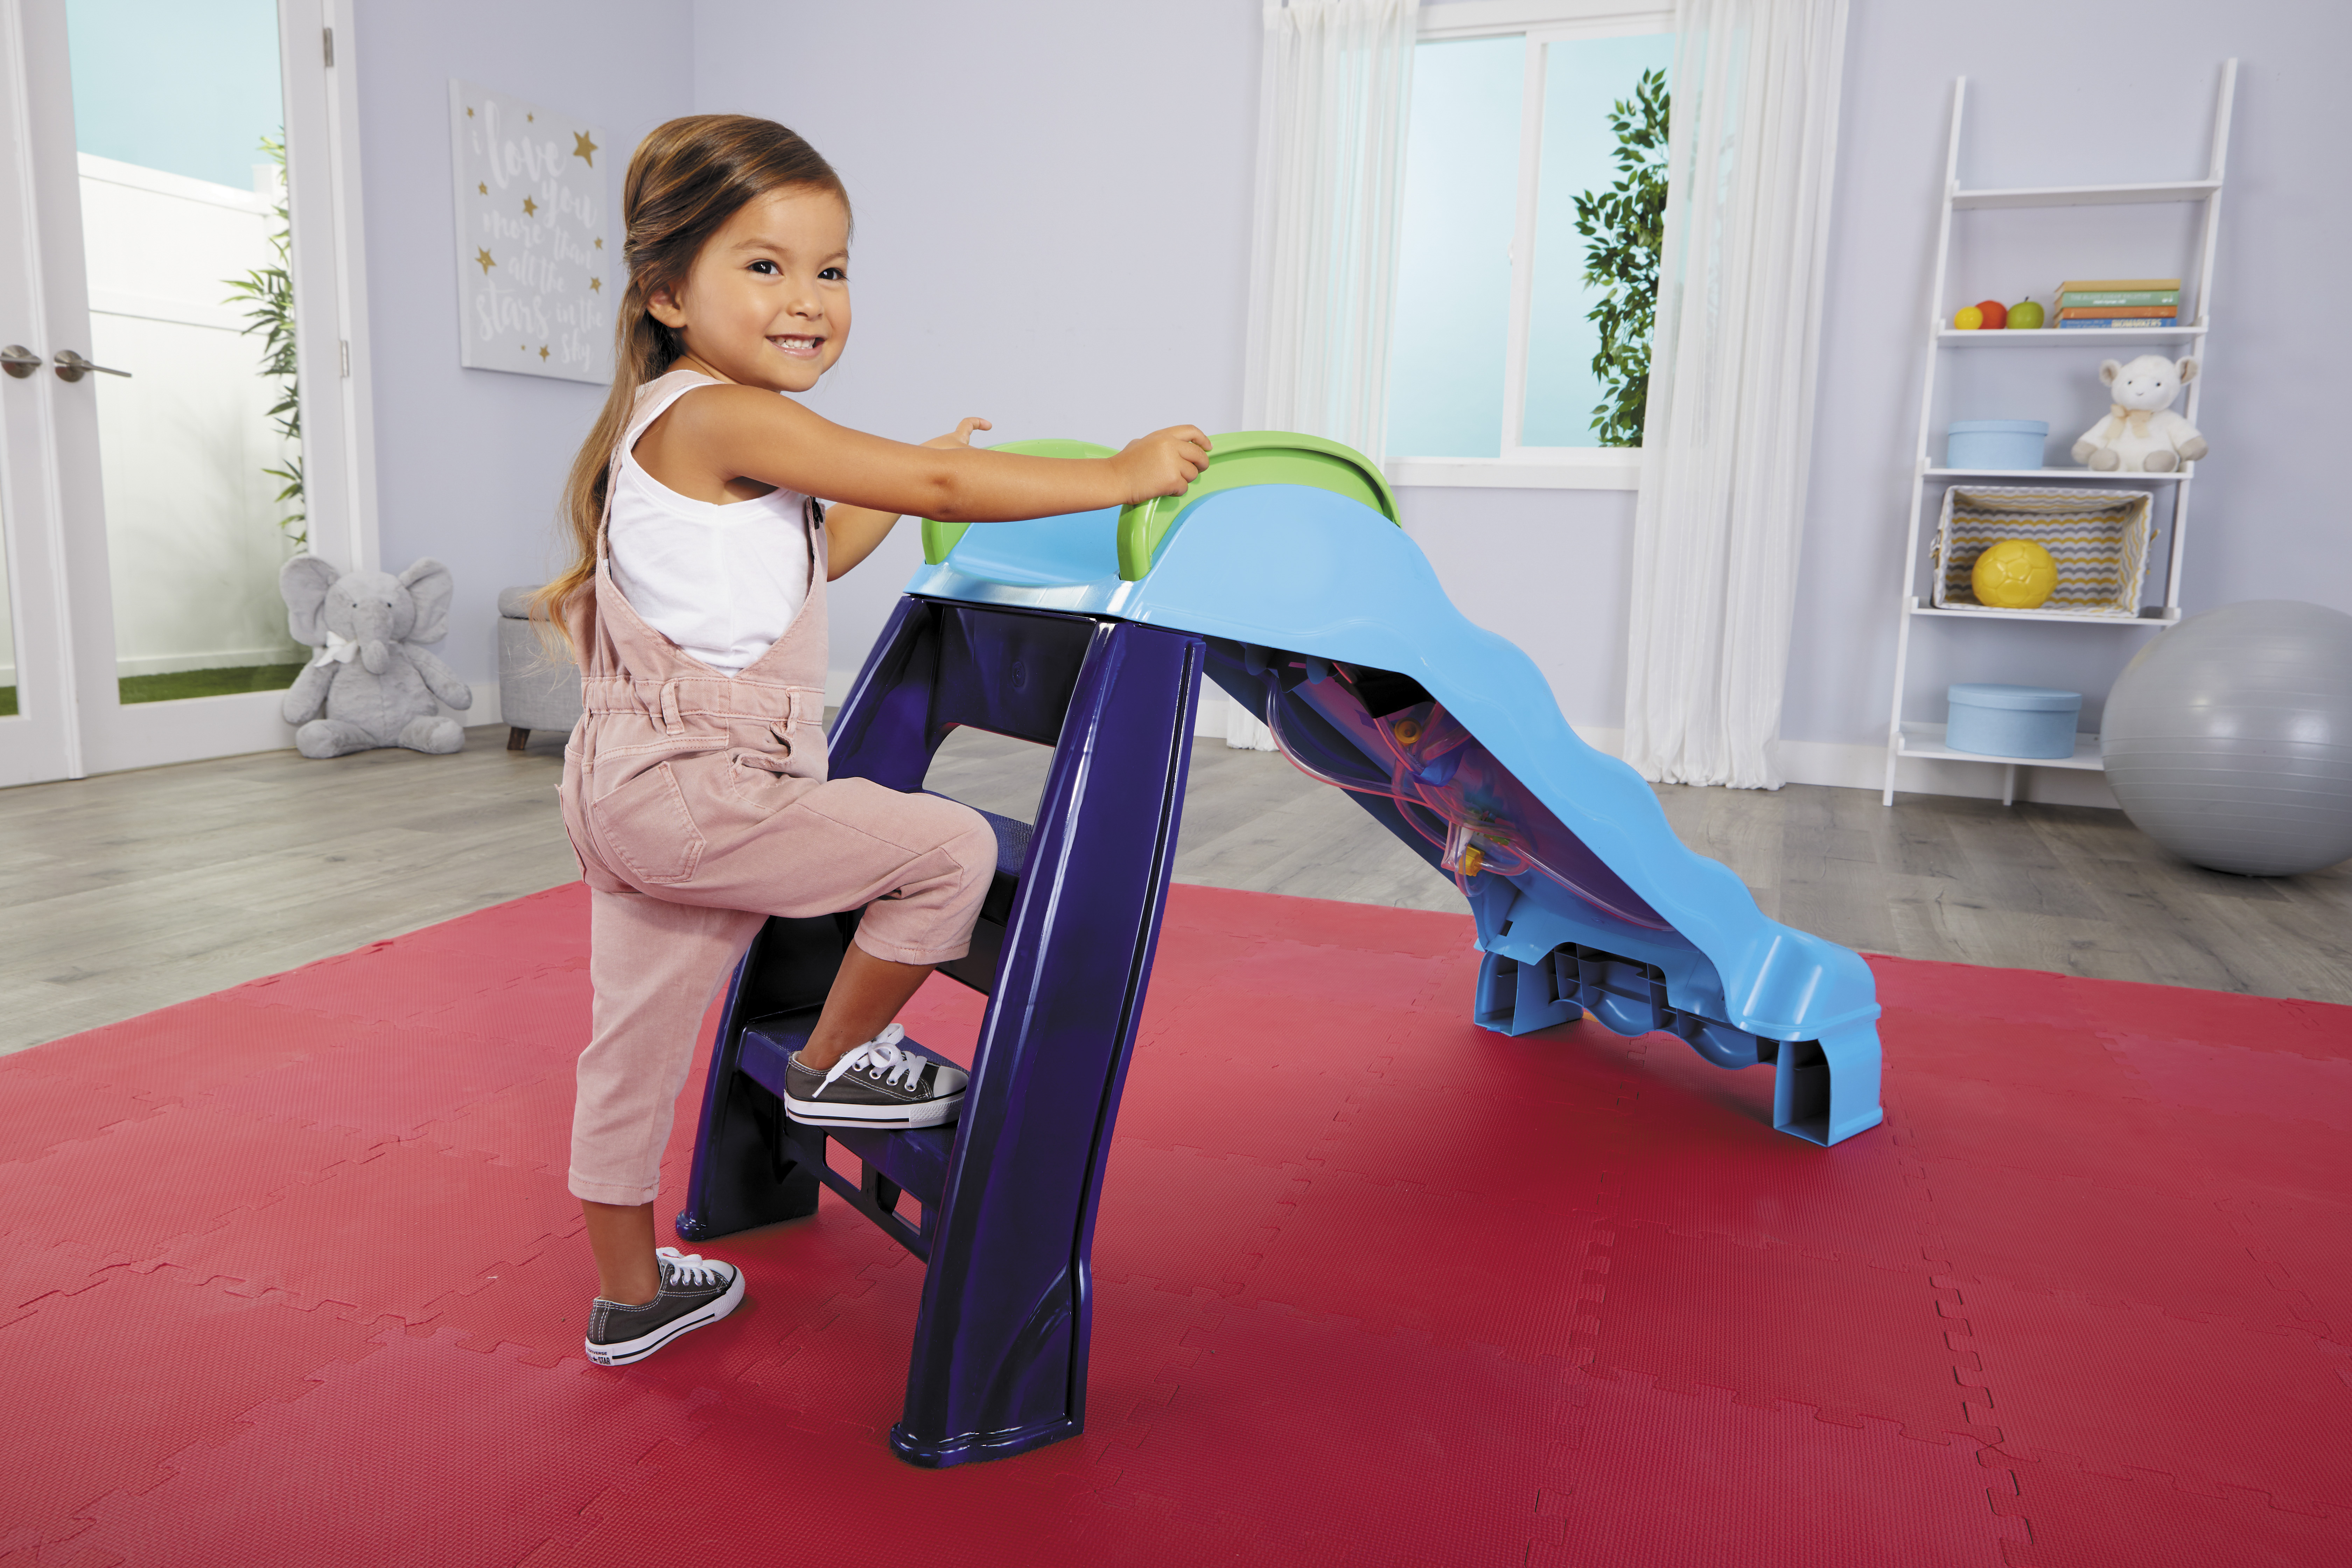 Little Tikes 2-in-1 Outdoor-Indoor Wet or Dry Slide Playground Slide with Folding For Easy Storage, Blue- For Kids Toddlers Boys Girls Ages 2 to 6 Year Old - image 6 of 9